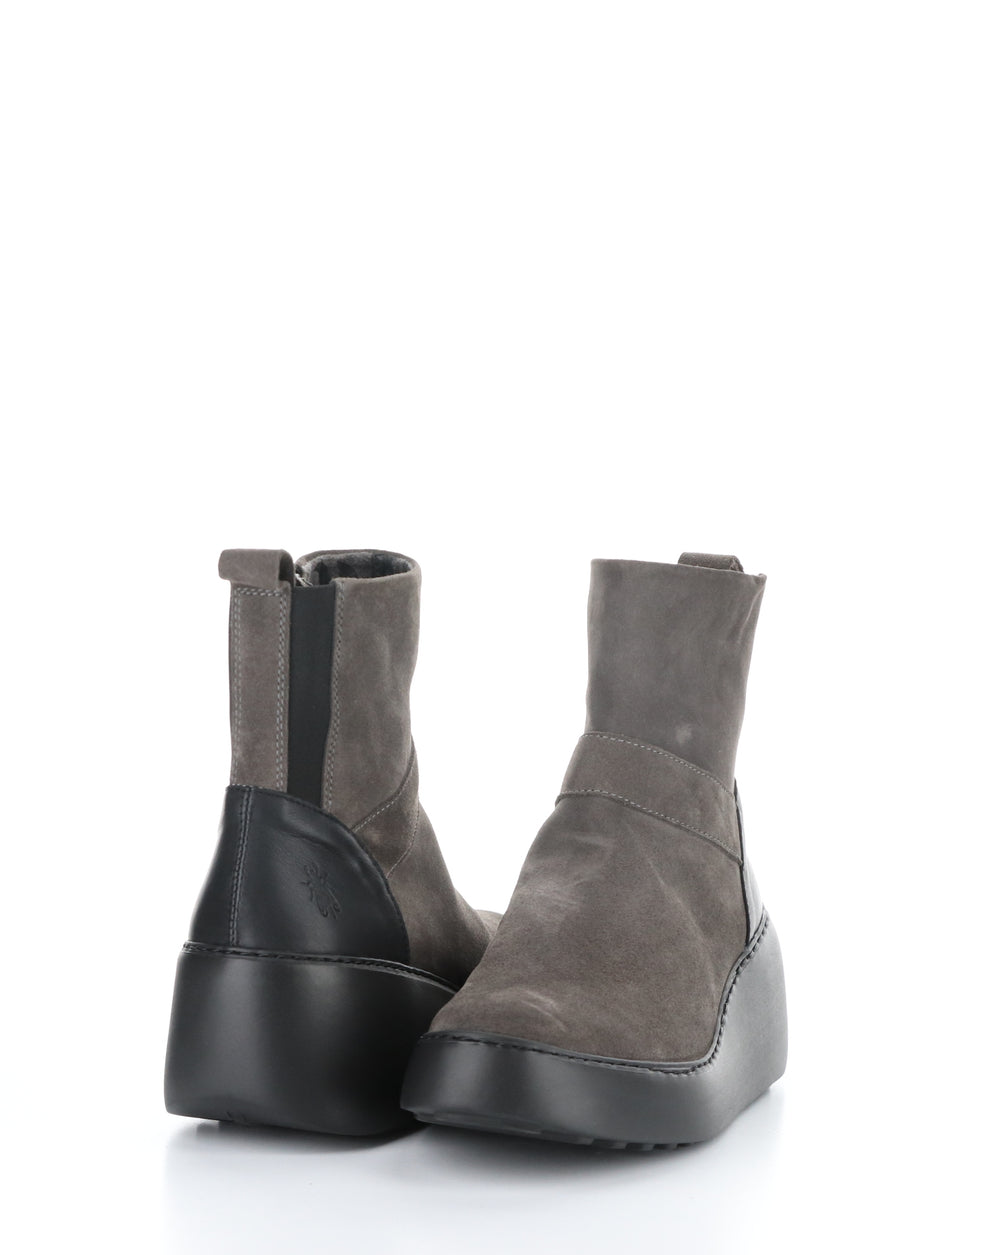 DOXE604FLY 001 ANTHRACITE/BLACK Elasticated Boots